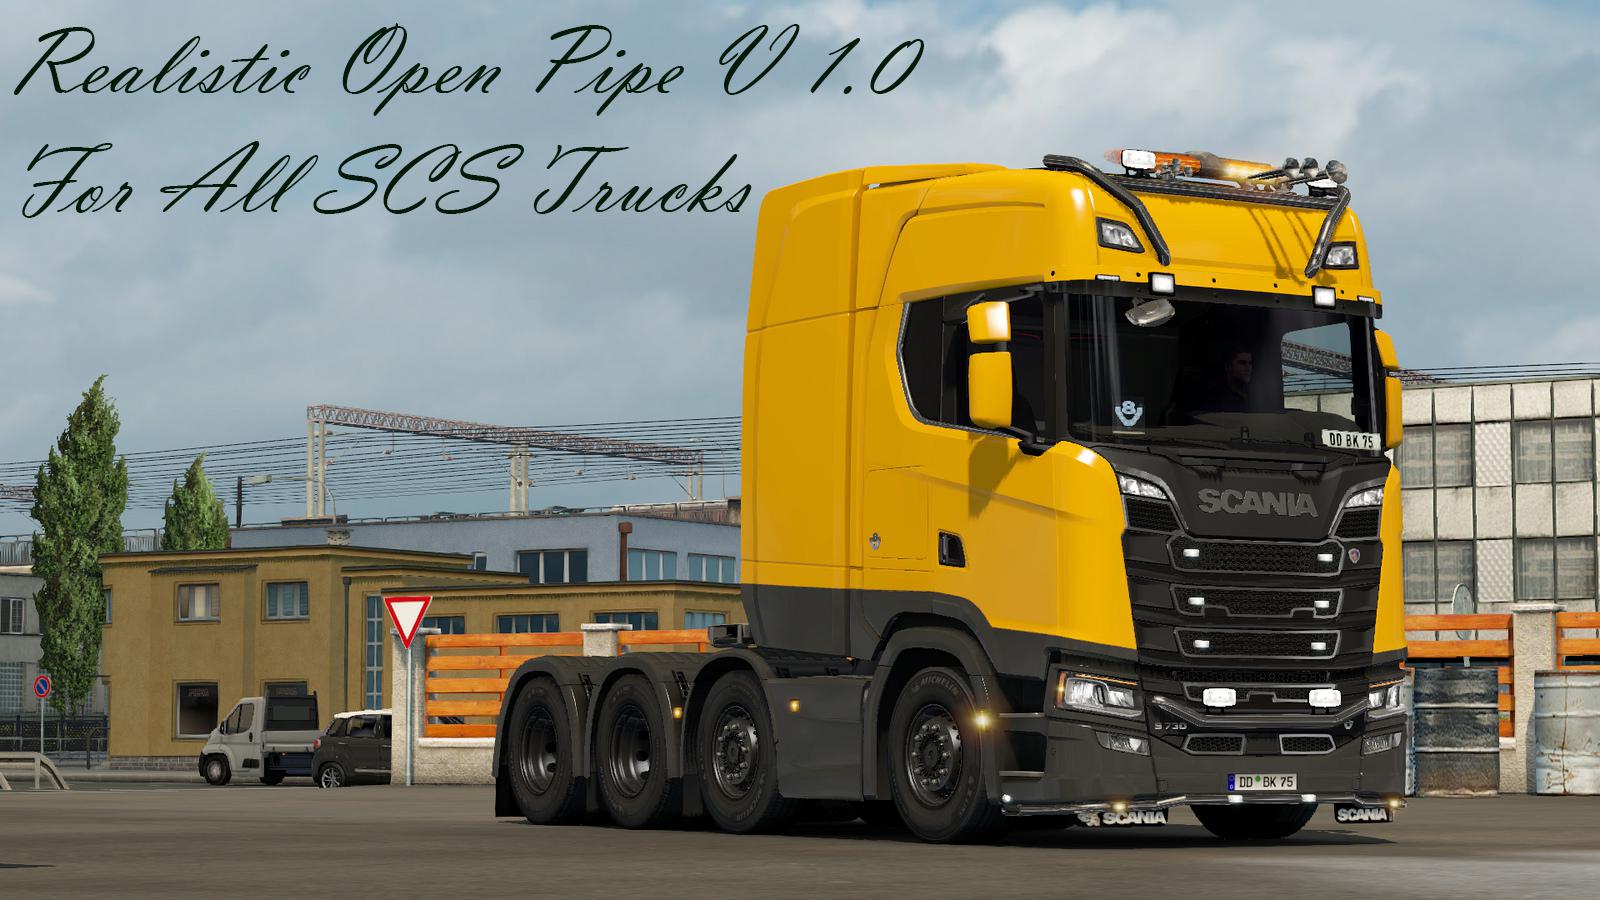 Realistic Open Pipe v1.0 For All SCS Trucks